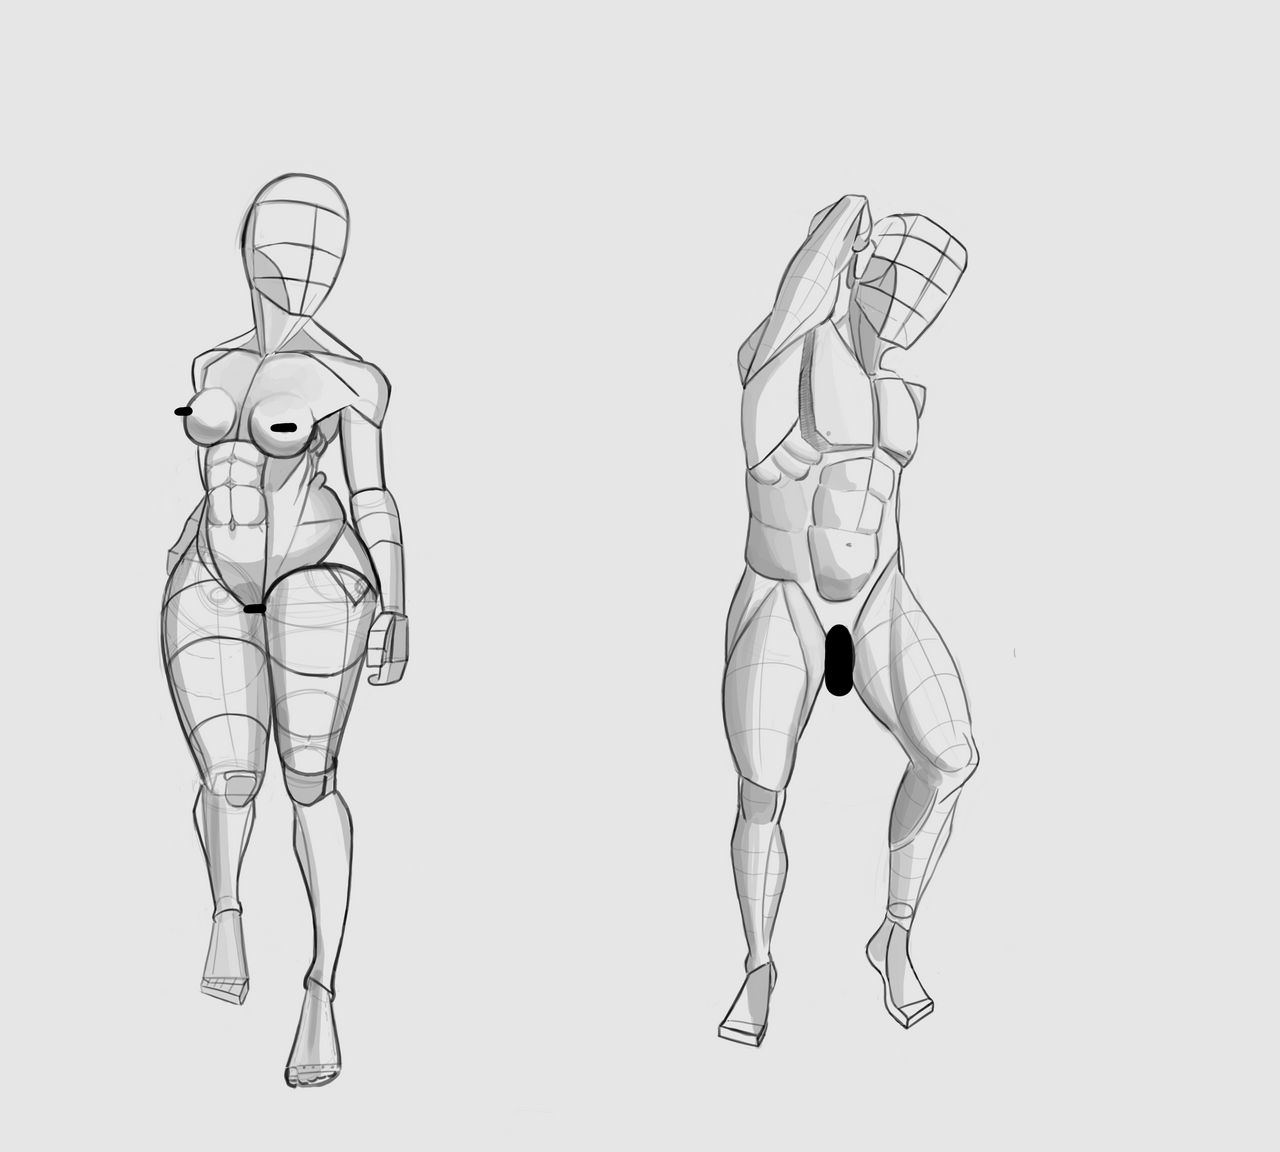 Daily Drawing - Mannequin Studies by Quackie101 on DeviantArt